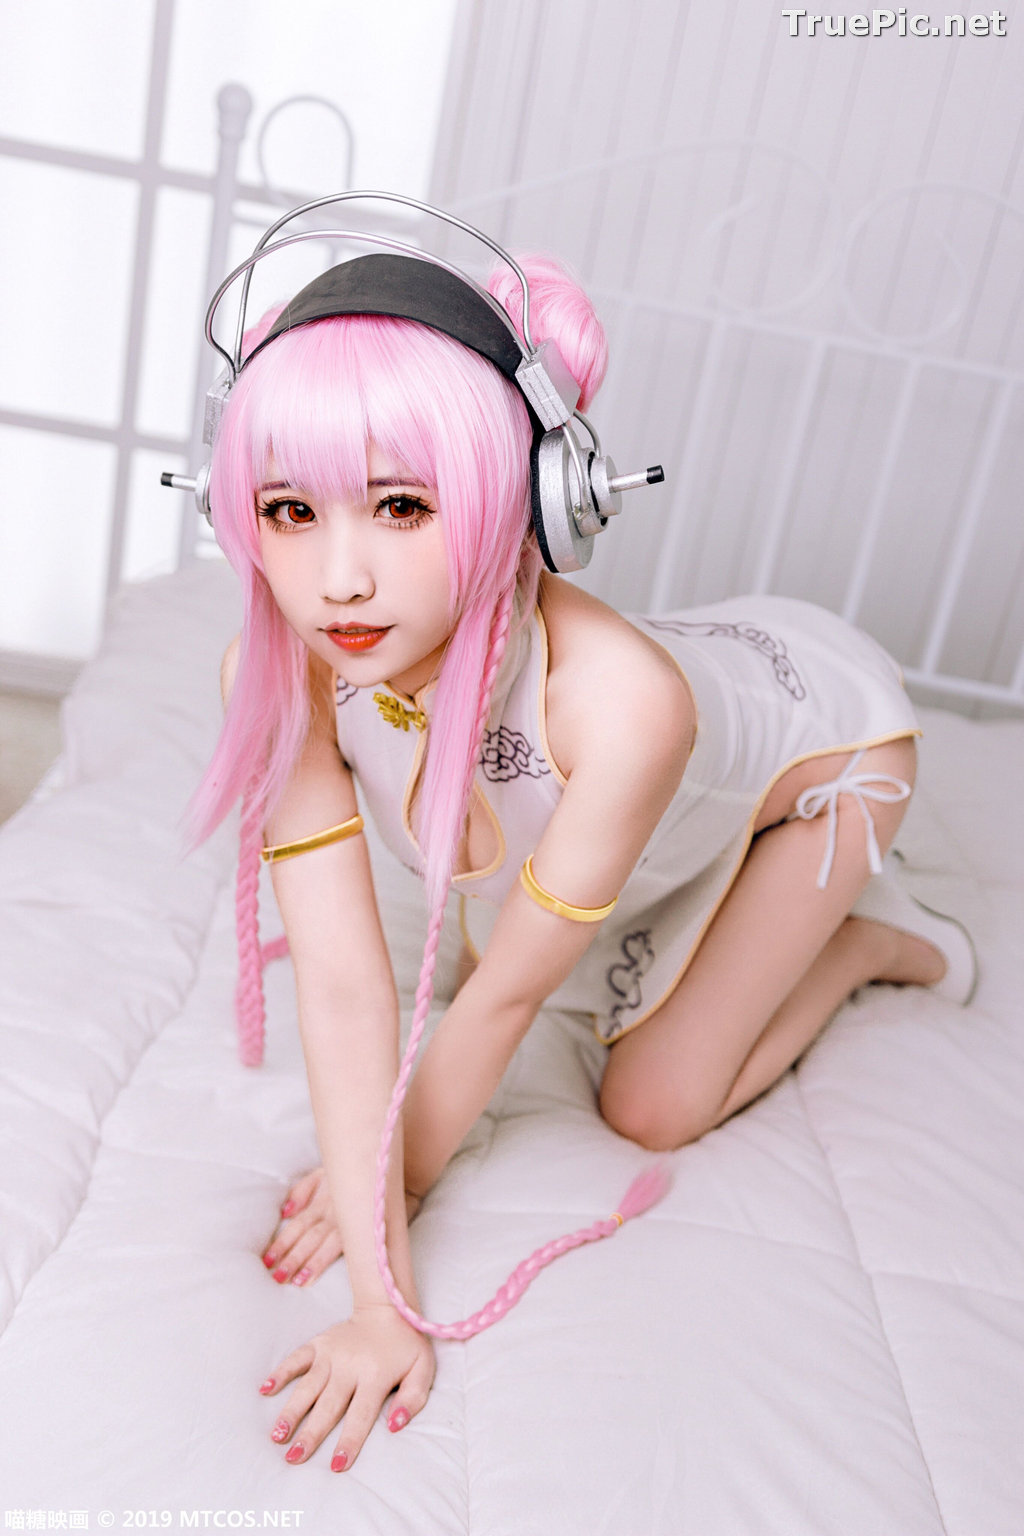 Image [MTCos] 喵糖映画 Vol.050 - Chinese Cute Model - Lovely Pink-haired - TruePic.net - Picture-20